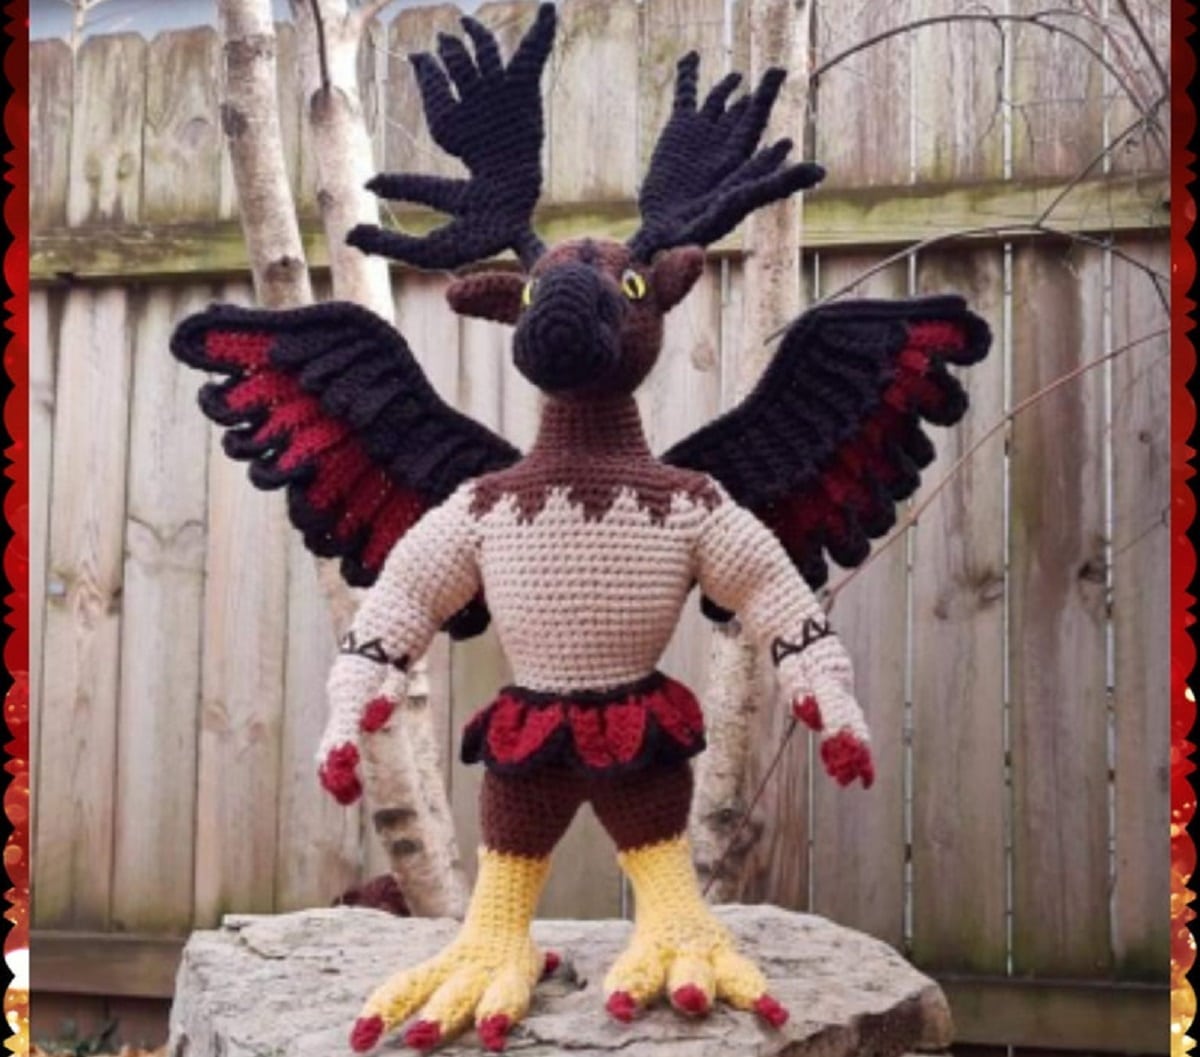 Crochet Pamela, a mountain spirit with antlers, wings, and animal feet standing on a rock in front of a wooden fence. 